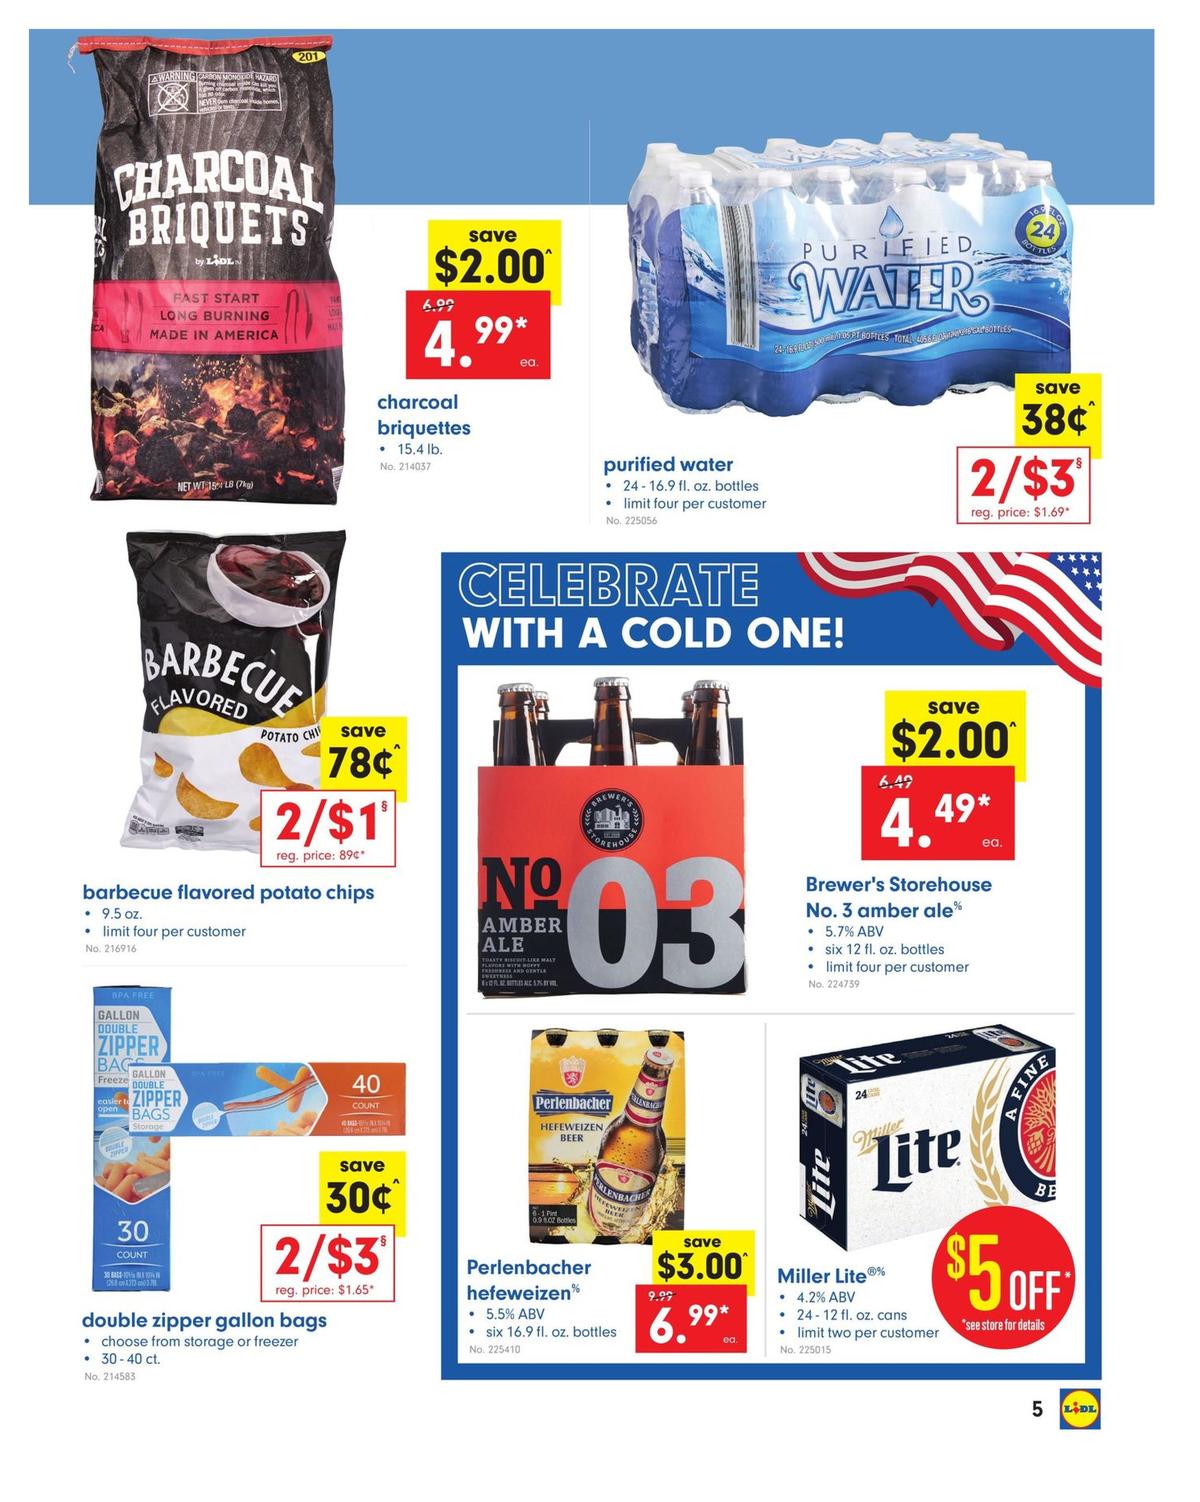 LIDL Weekly Ad from July 3